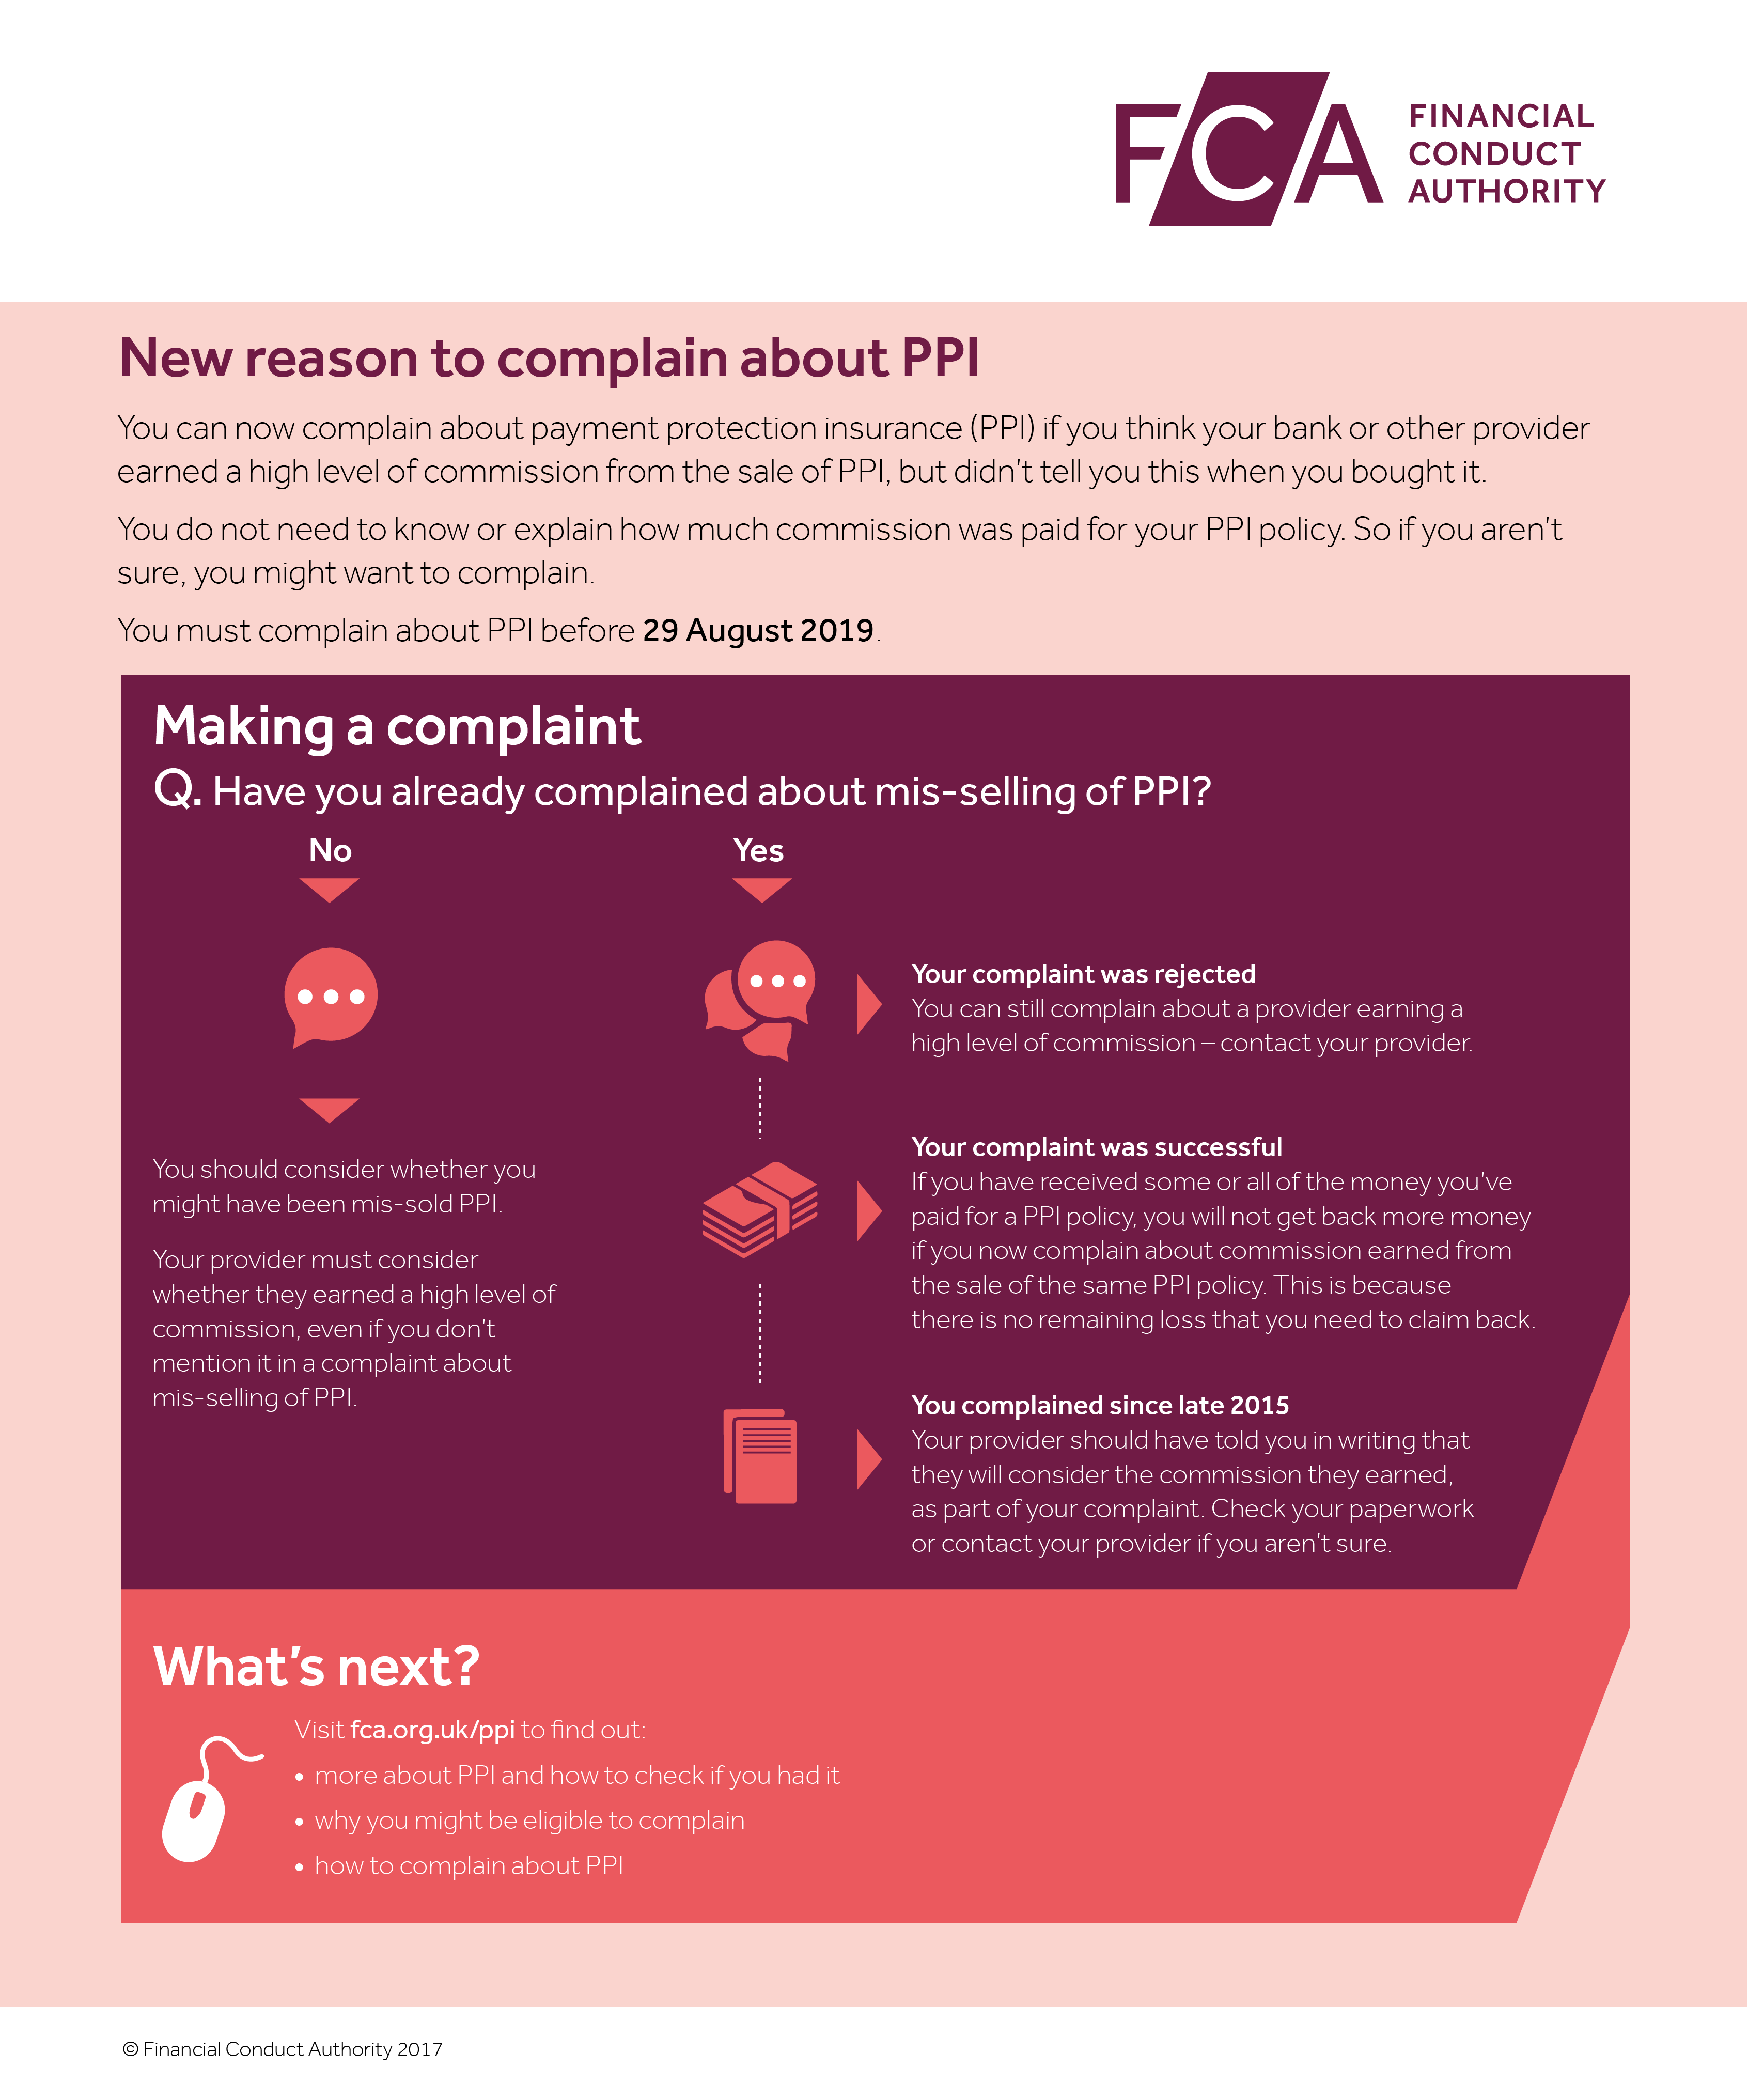 New basis for making a PPI complaint